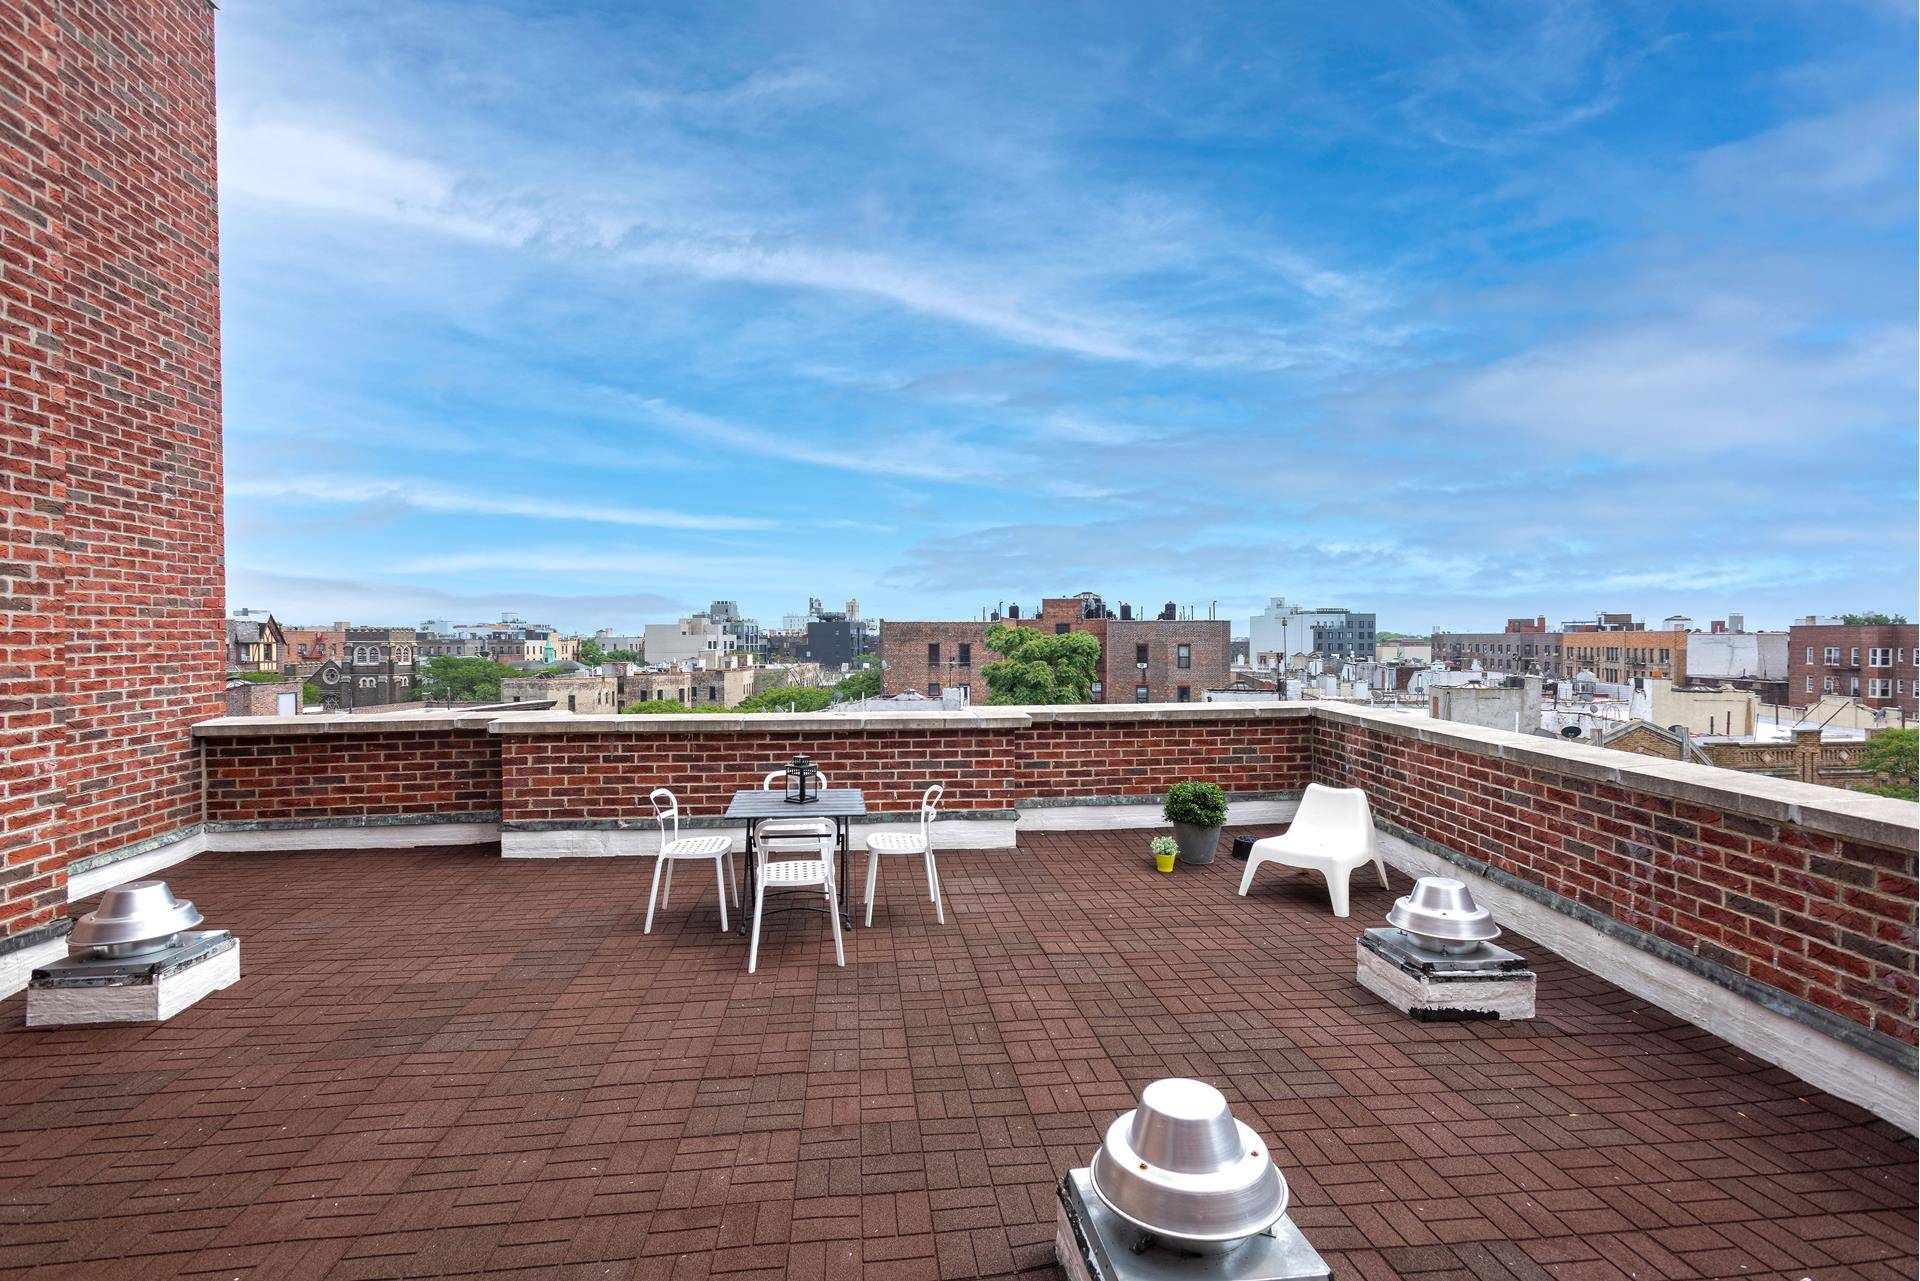 PENTHOUSE B is a spectacular very private penthouse residence resting at the top floor of the boutique Caton Court Condominiums in the heart of Prospect Park South.